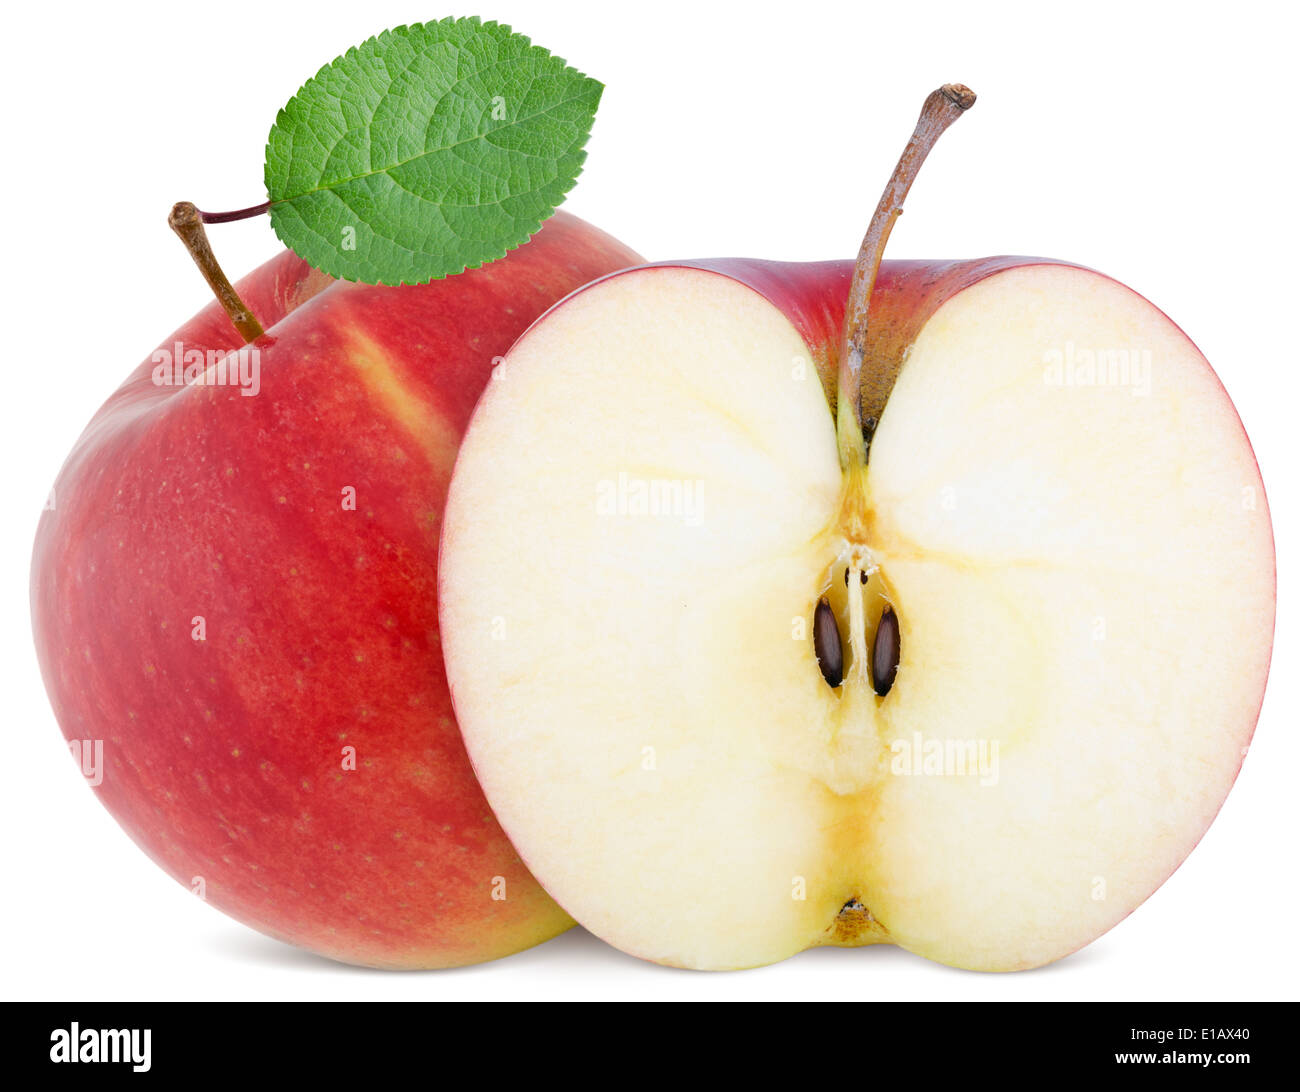 full apple and cut slice isolated on white background Stock Photo